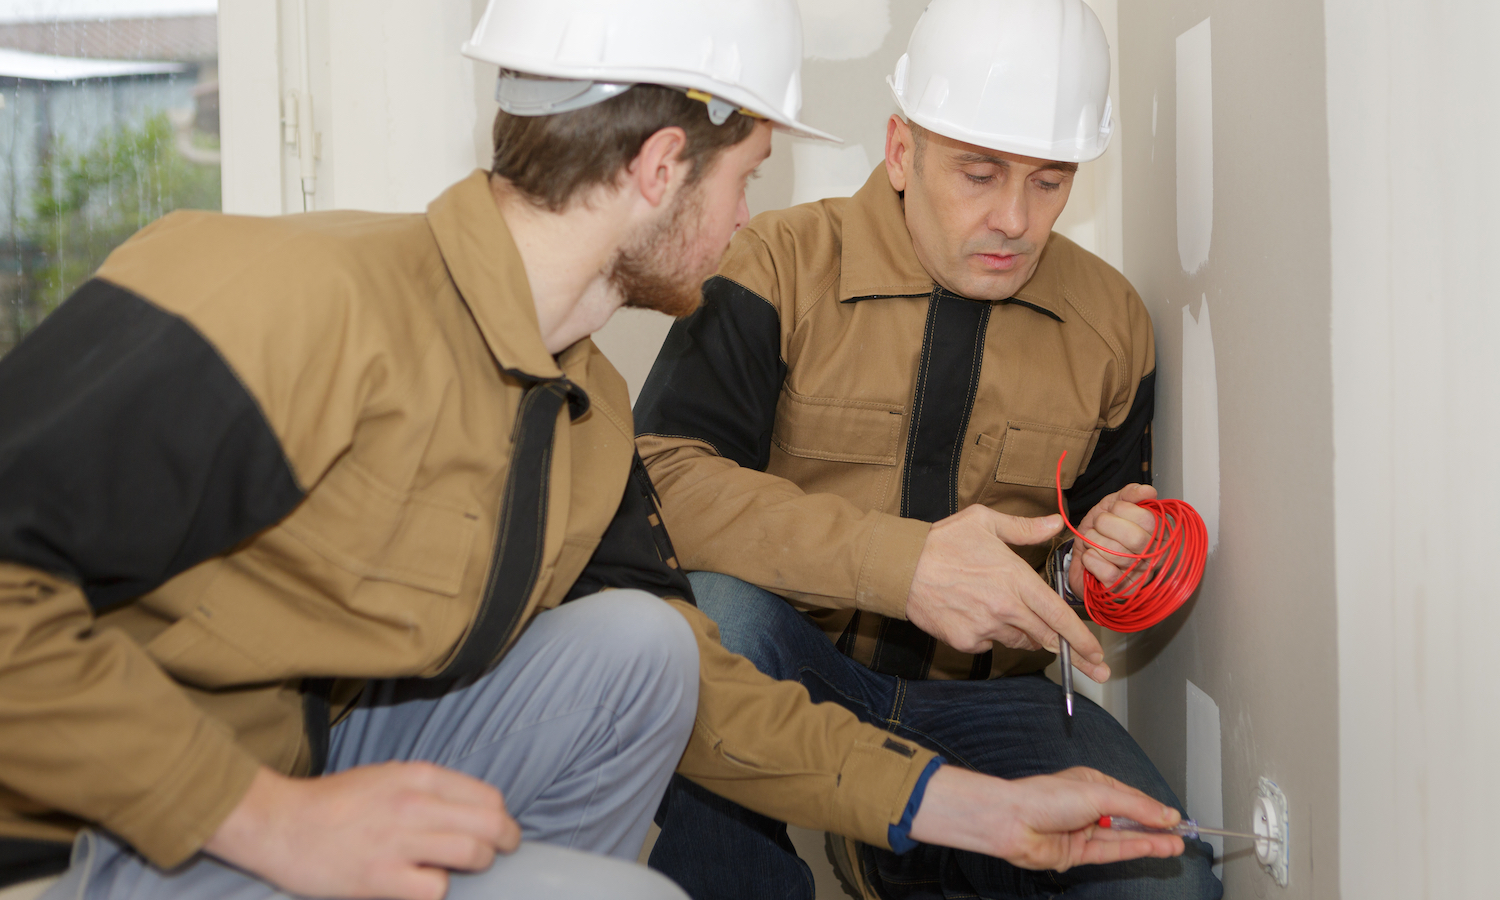 hiring electrician - apprentice with supervisor holding cable by plug socket